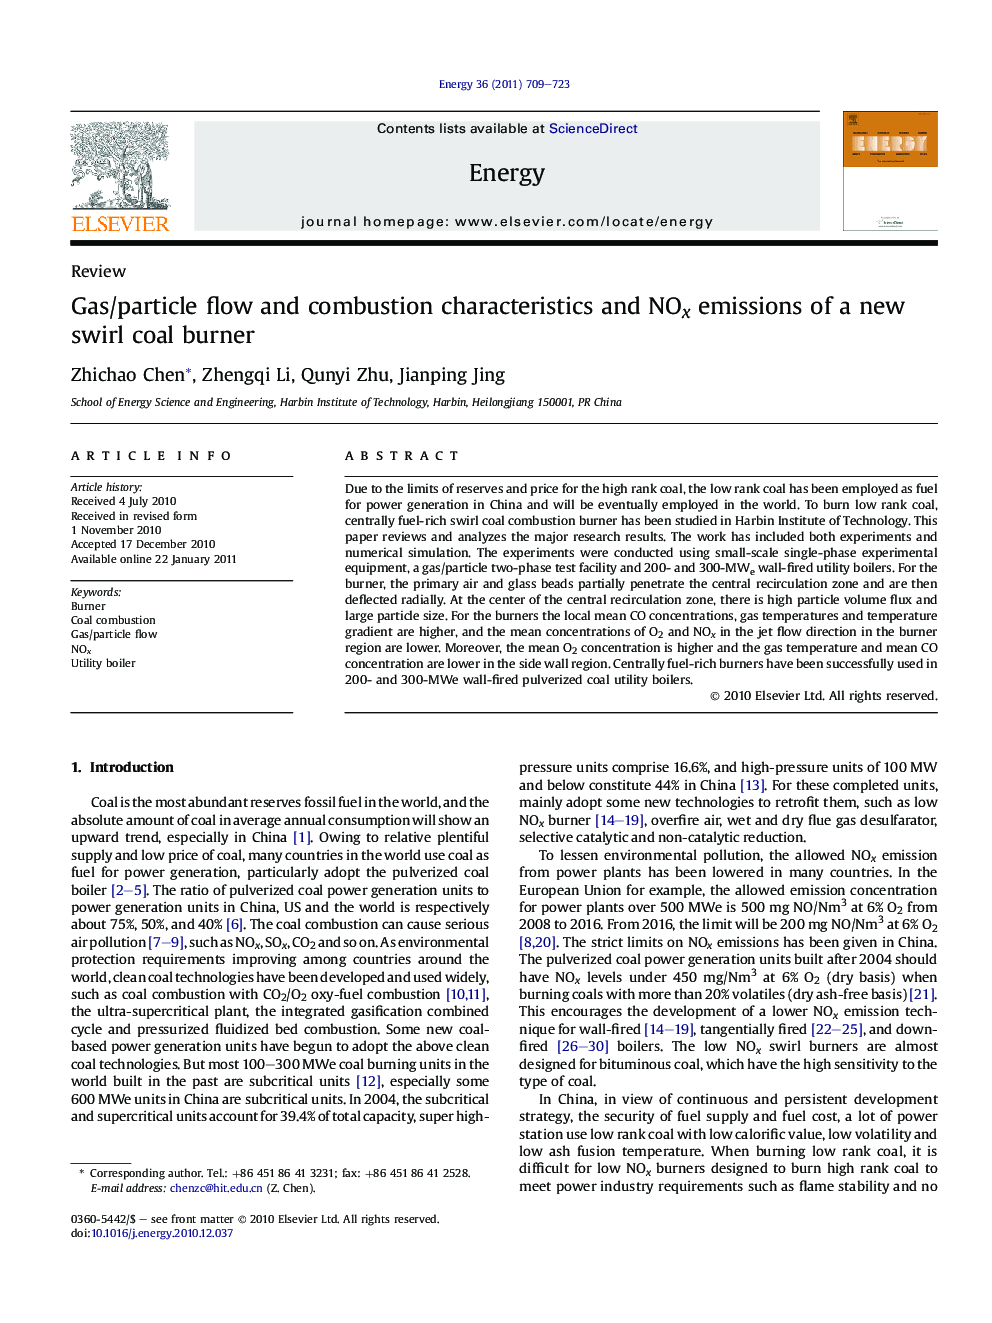 Gas/particle flow and combustion characteristics and NOx emissions of a new swirl coal burner